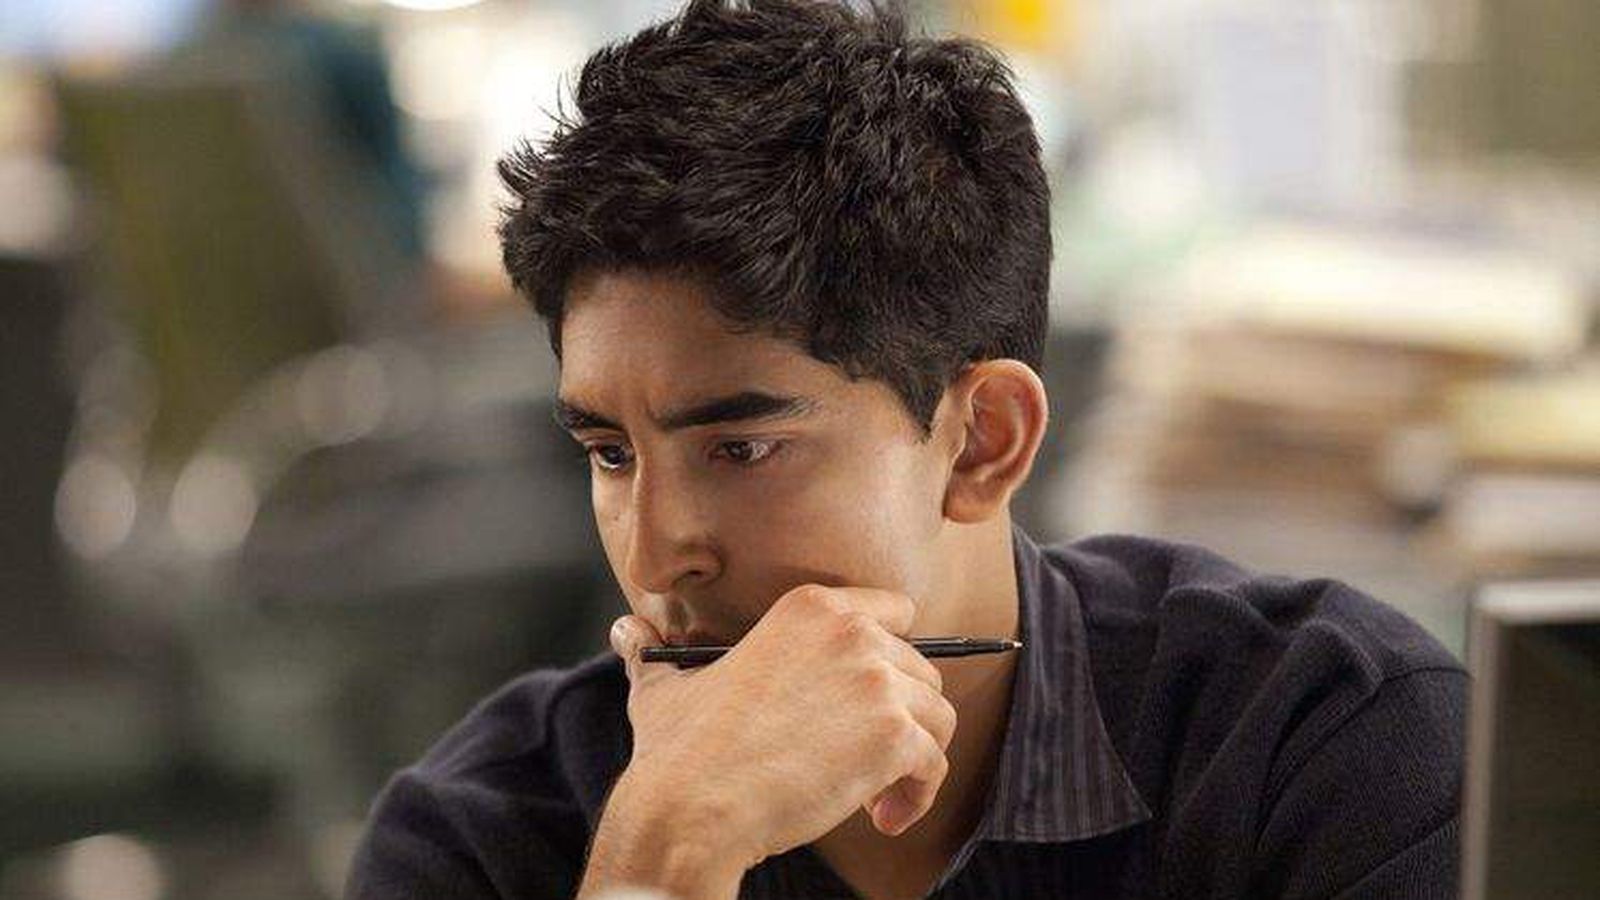 Dev Patel is driven to succeed in Hollywood